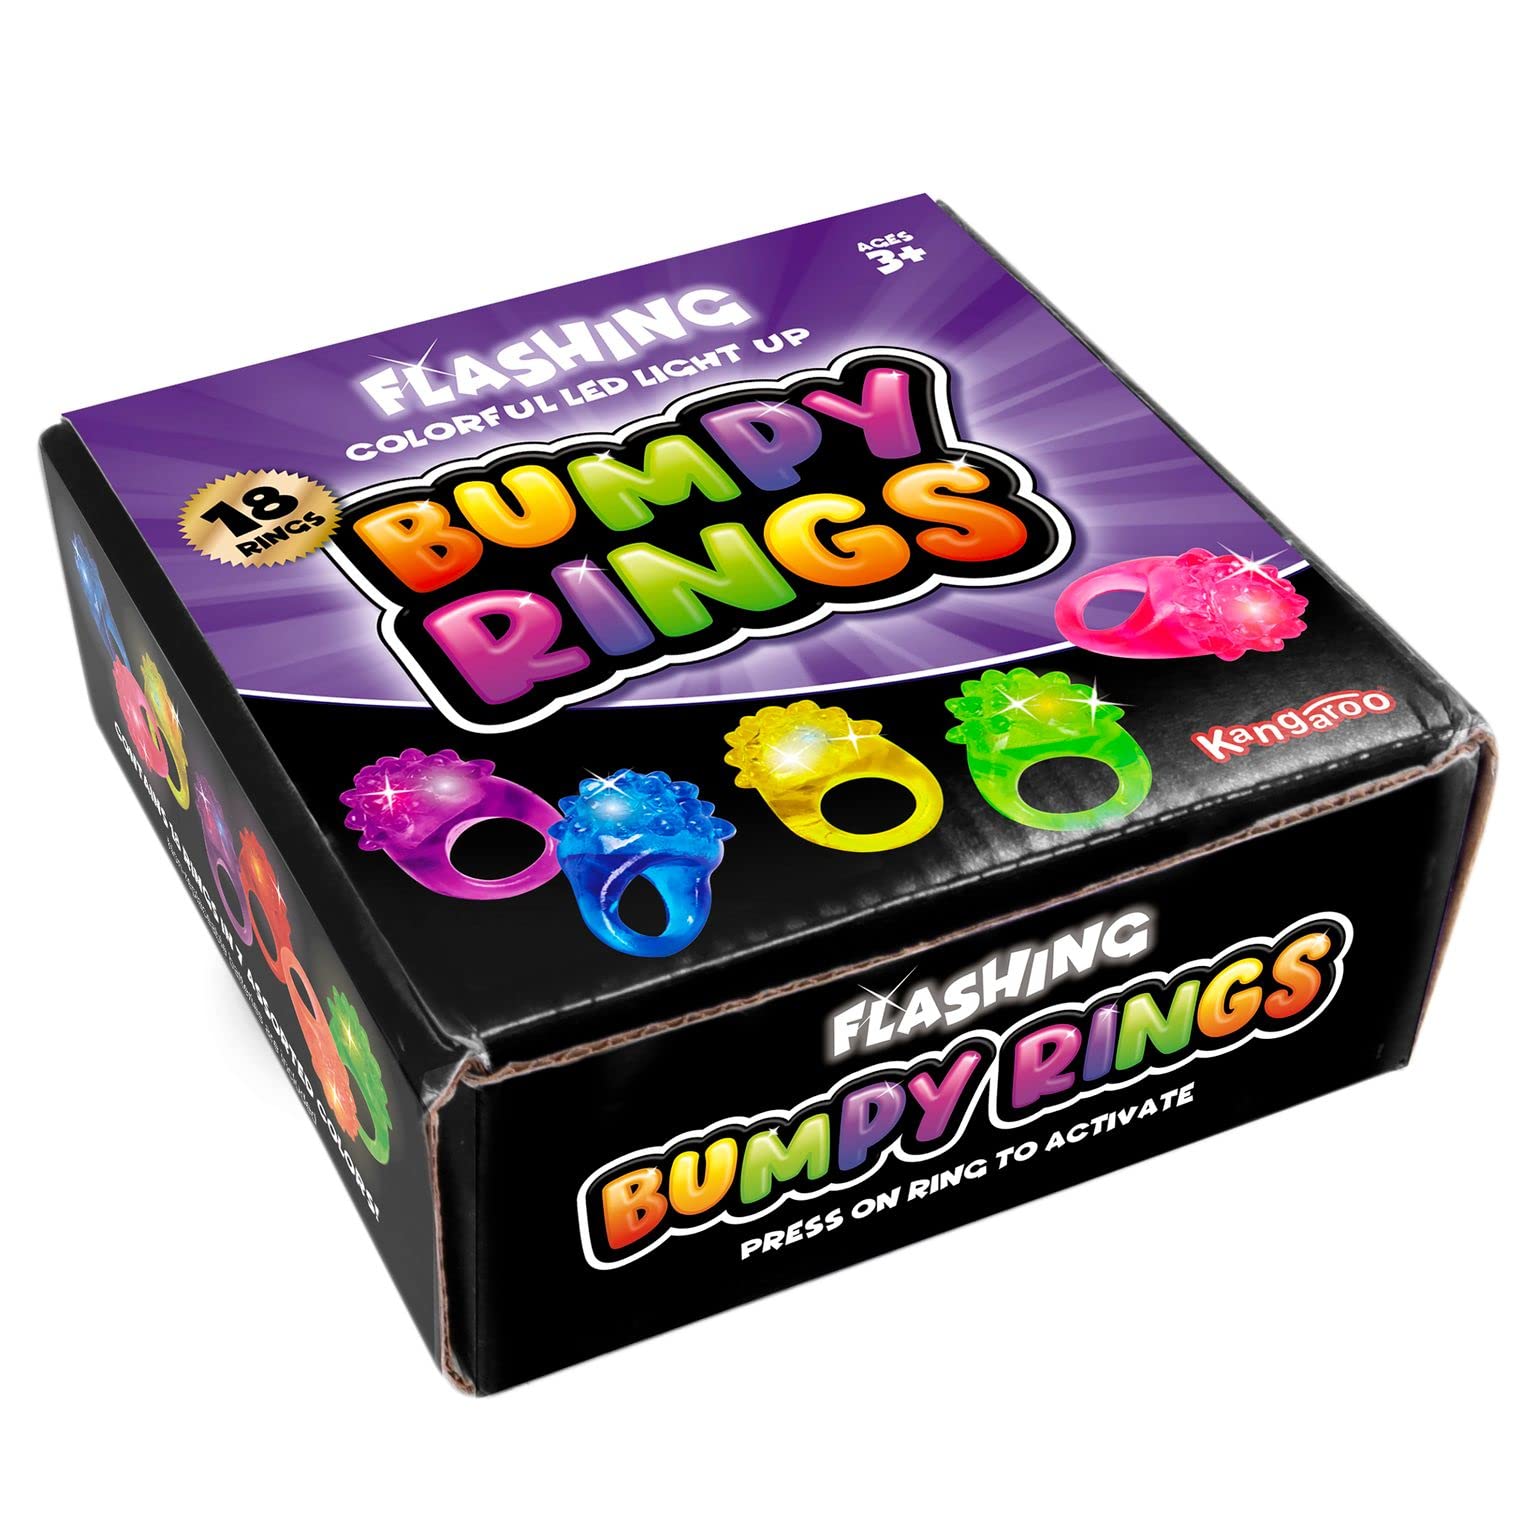 Kangaroo Kids' LED Light Up Rings or Glow-in-The-Dark Neon Ring Bumpy Toy Decorations for Birthday Party Favors, Glow Party Favors, Small Toys for Kids Prizes, Surprise Toys for Girls, Boys